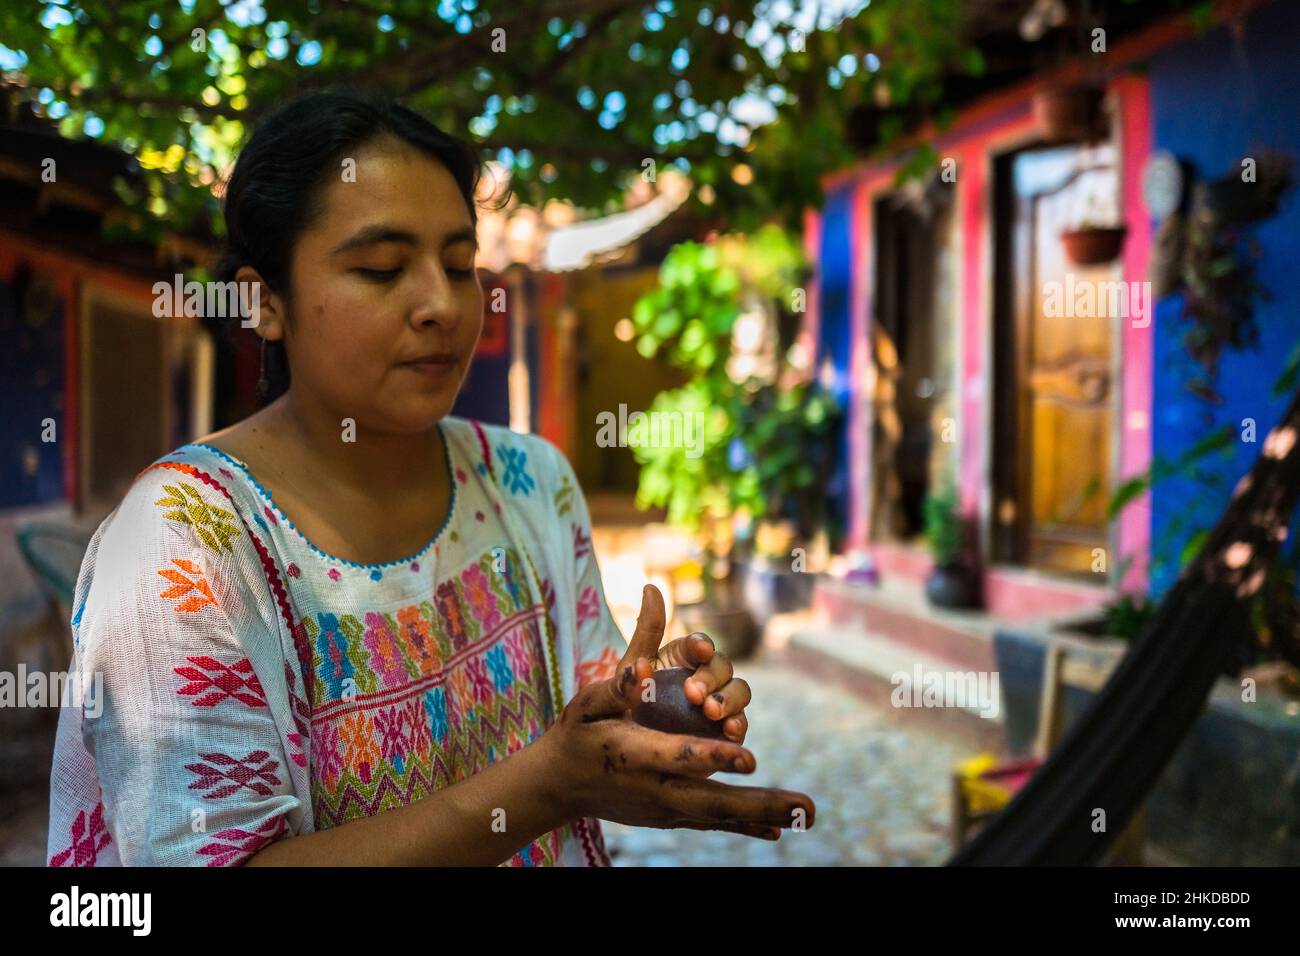 An indigenous woman rolls the raw cacao paste into balls, used for hot chocolate, in artisanal chocolate manufacture in Xochistlahuaca, Mexico. Stock Photo